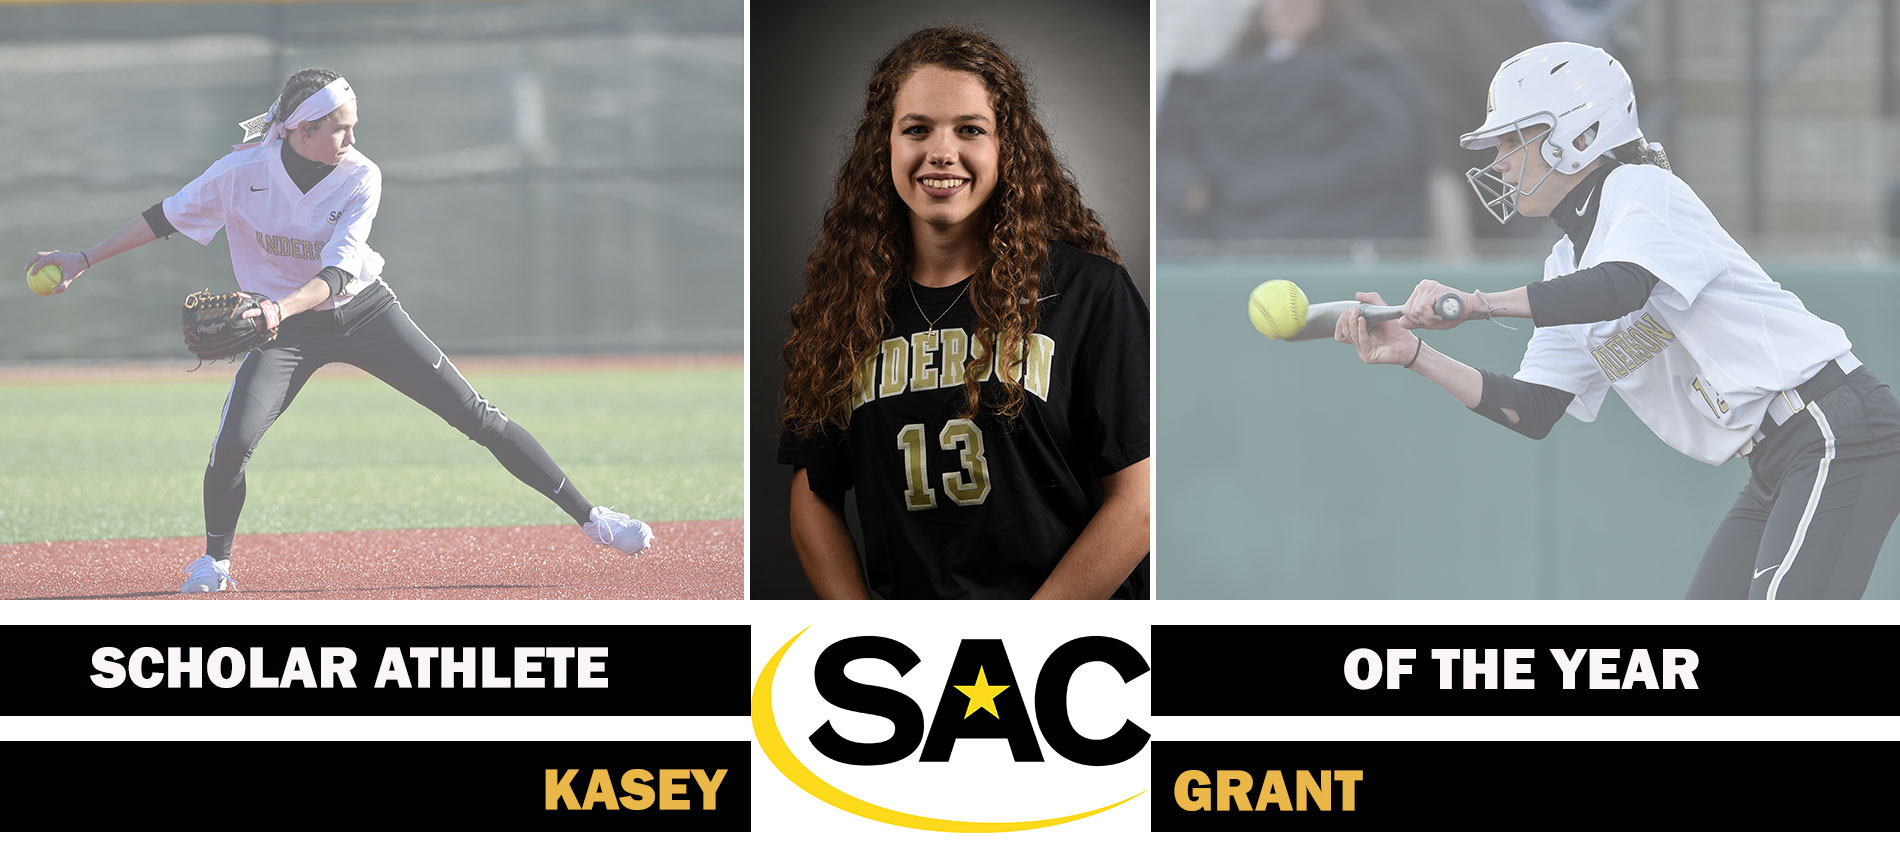 Grant Named South Atlantic Conference Softball Scholar-Athlete of the Year